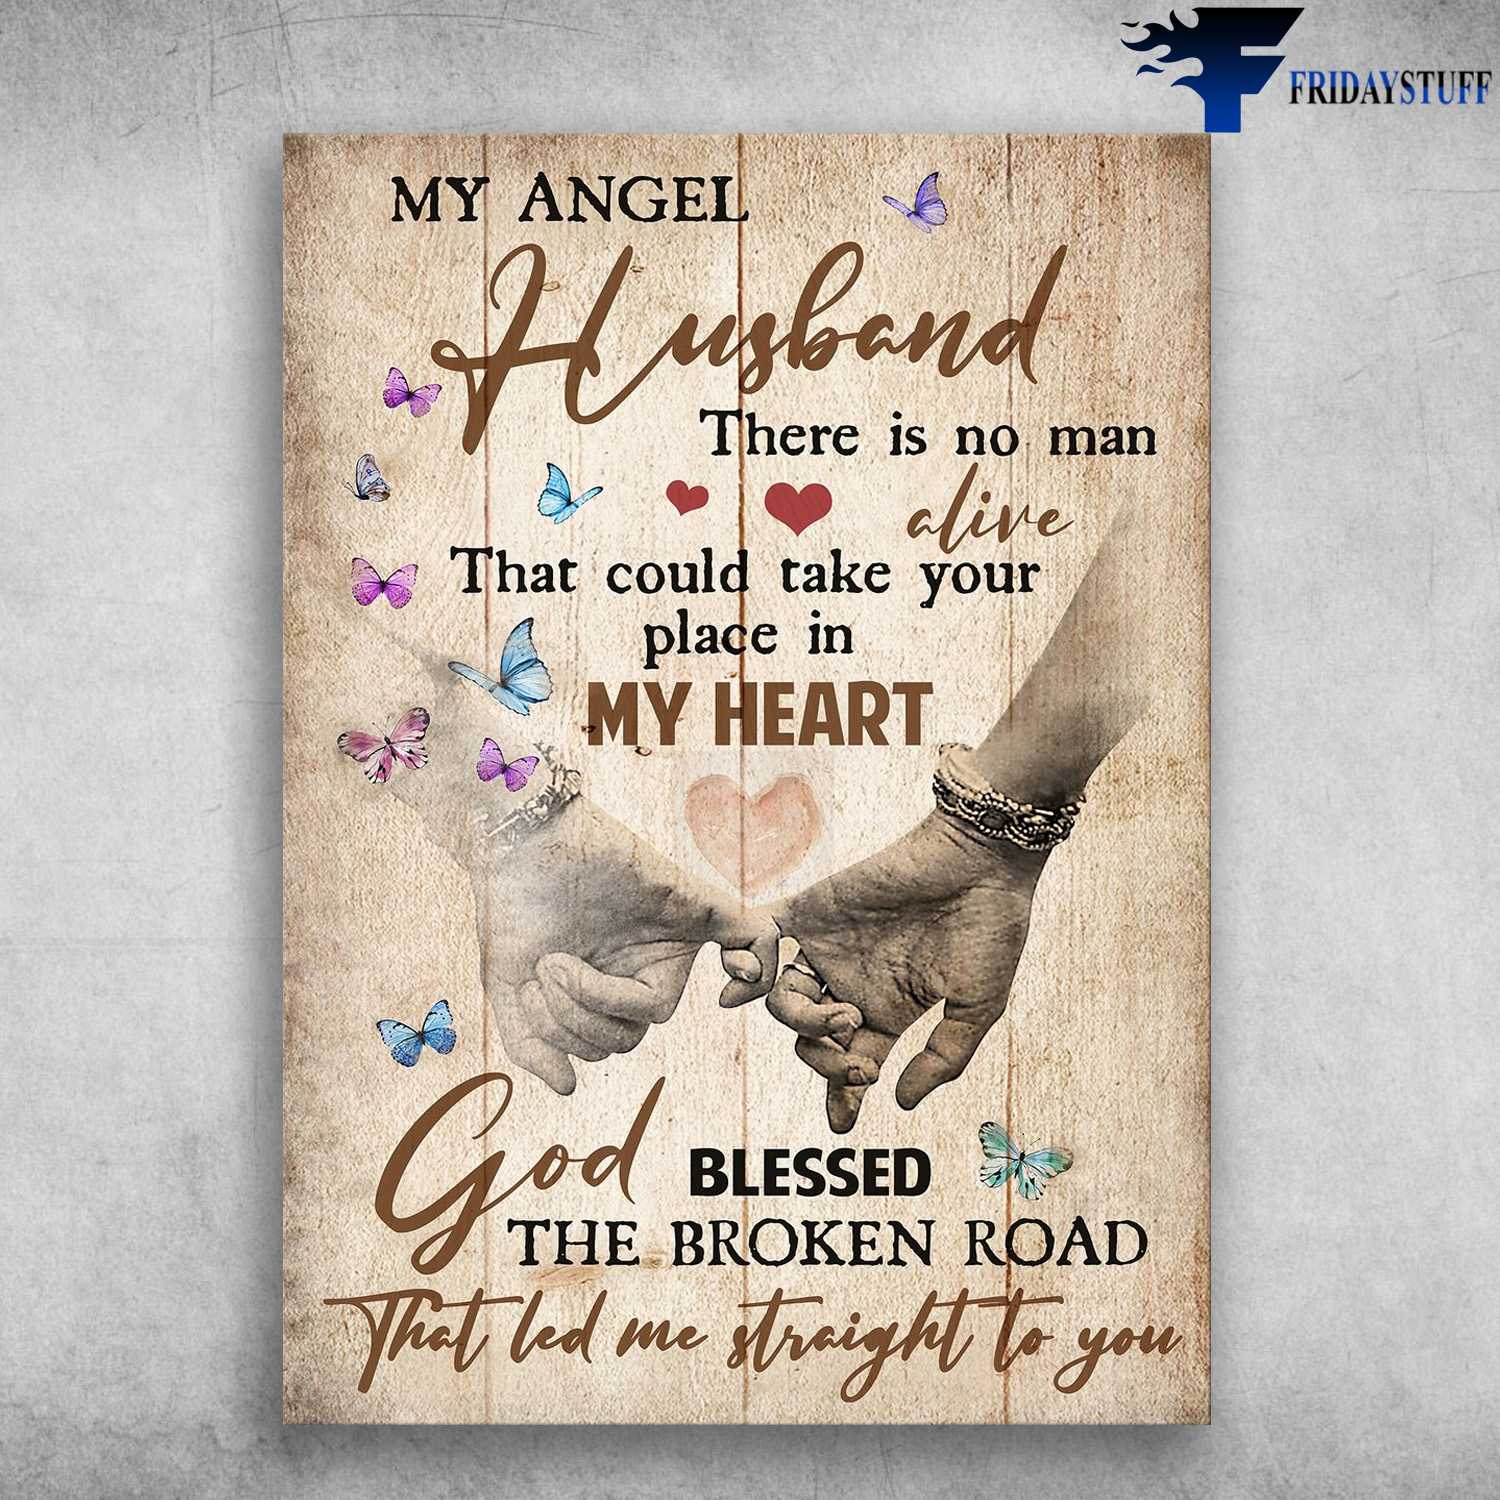 Husband And Wife - My Angel Husband, There Is No Man Alive, That Could Take Your Place In My Heart, God Blessed The Broken Road, That Led Me Straight To You